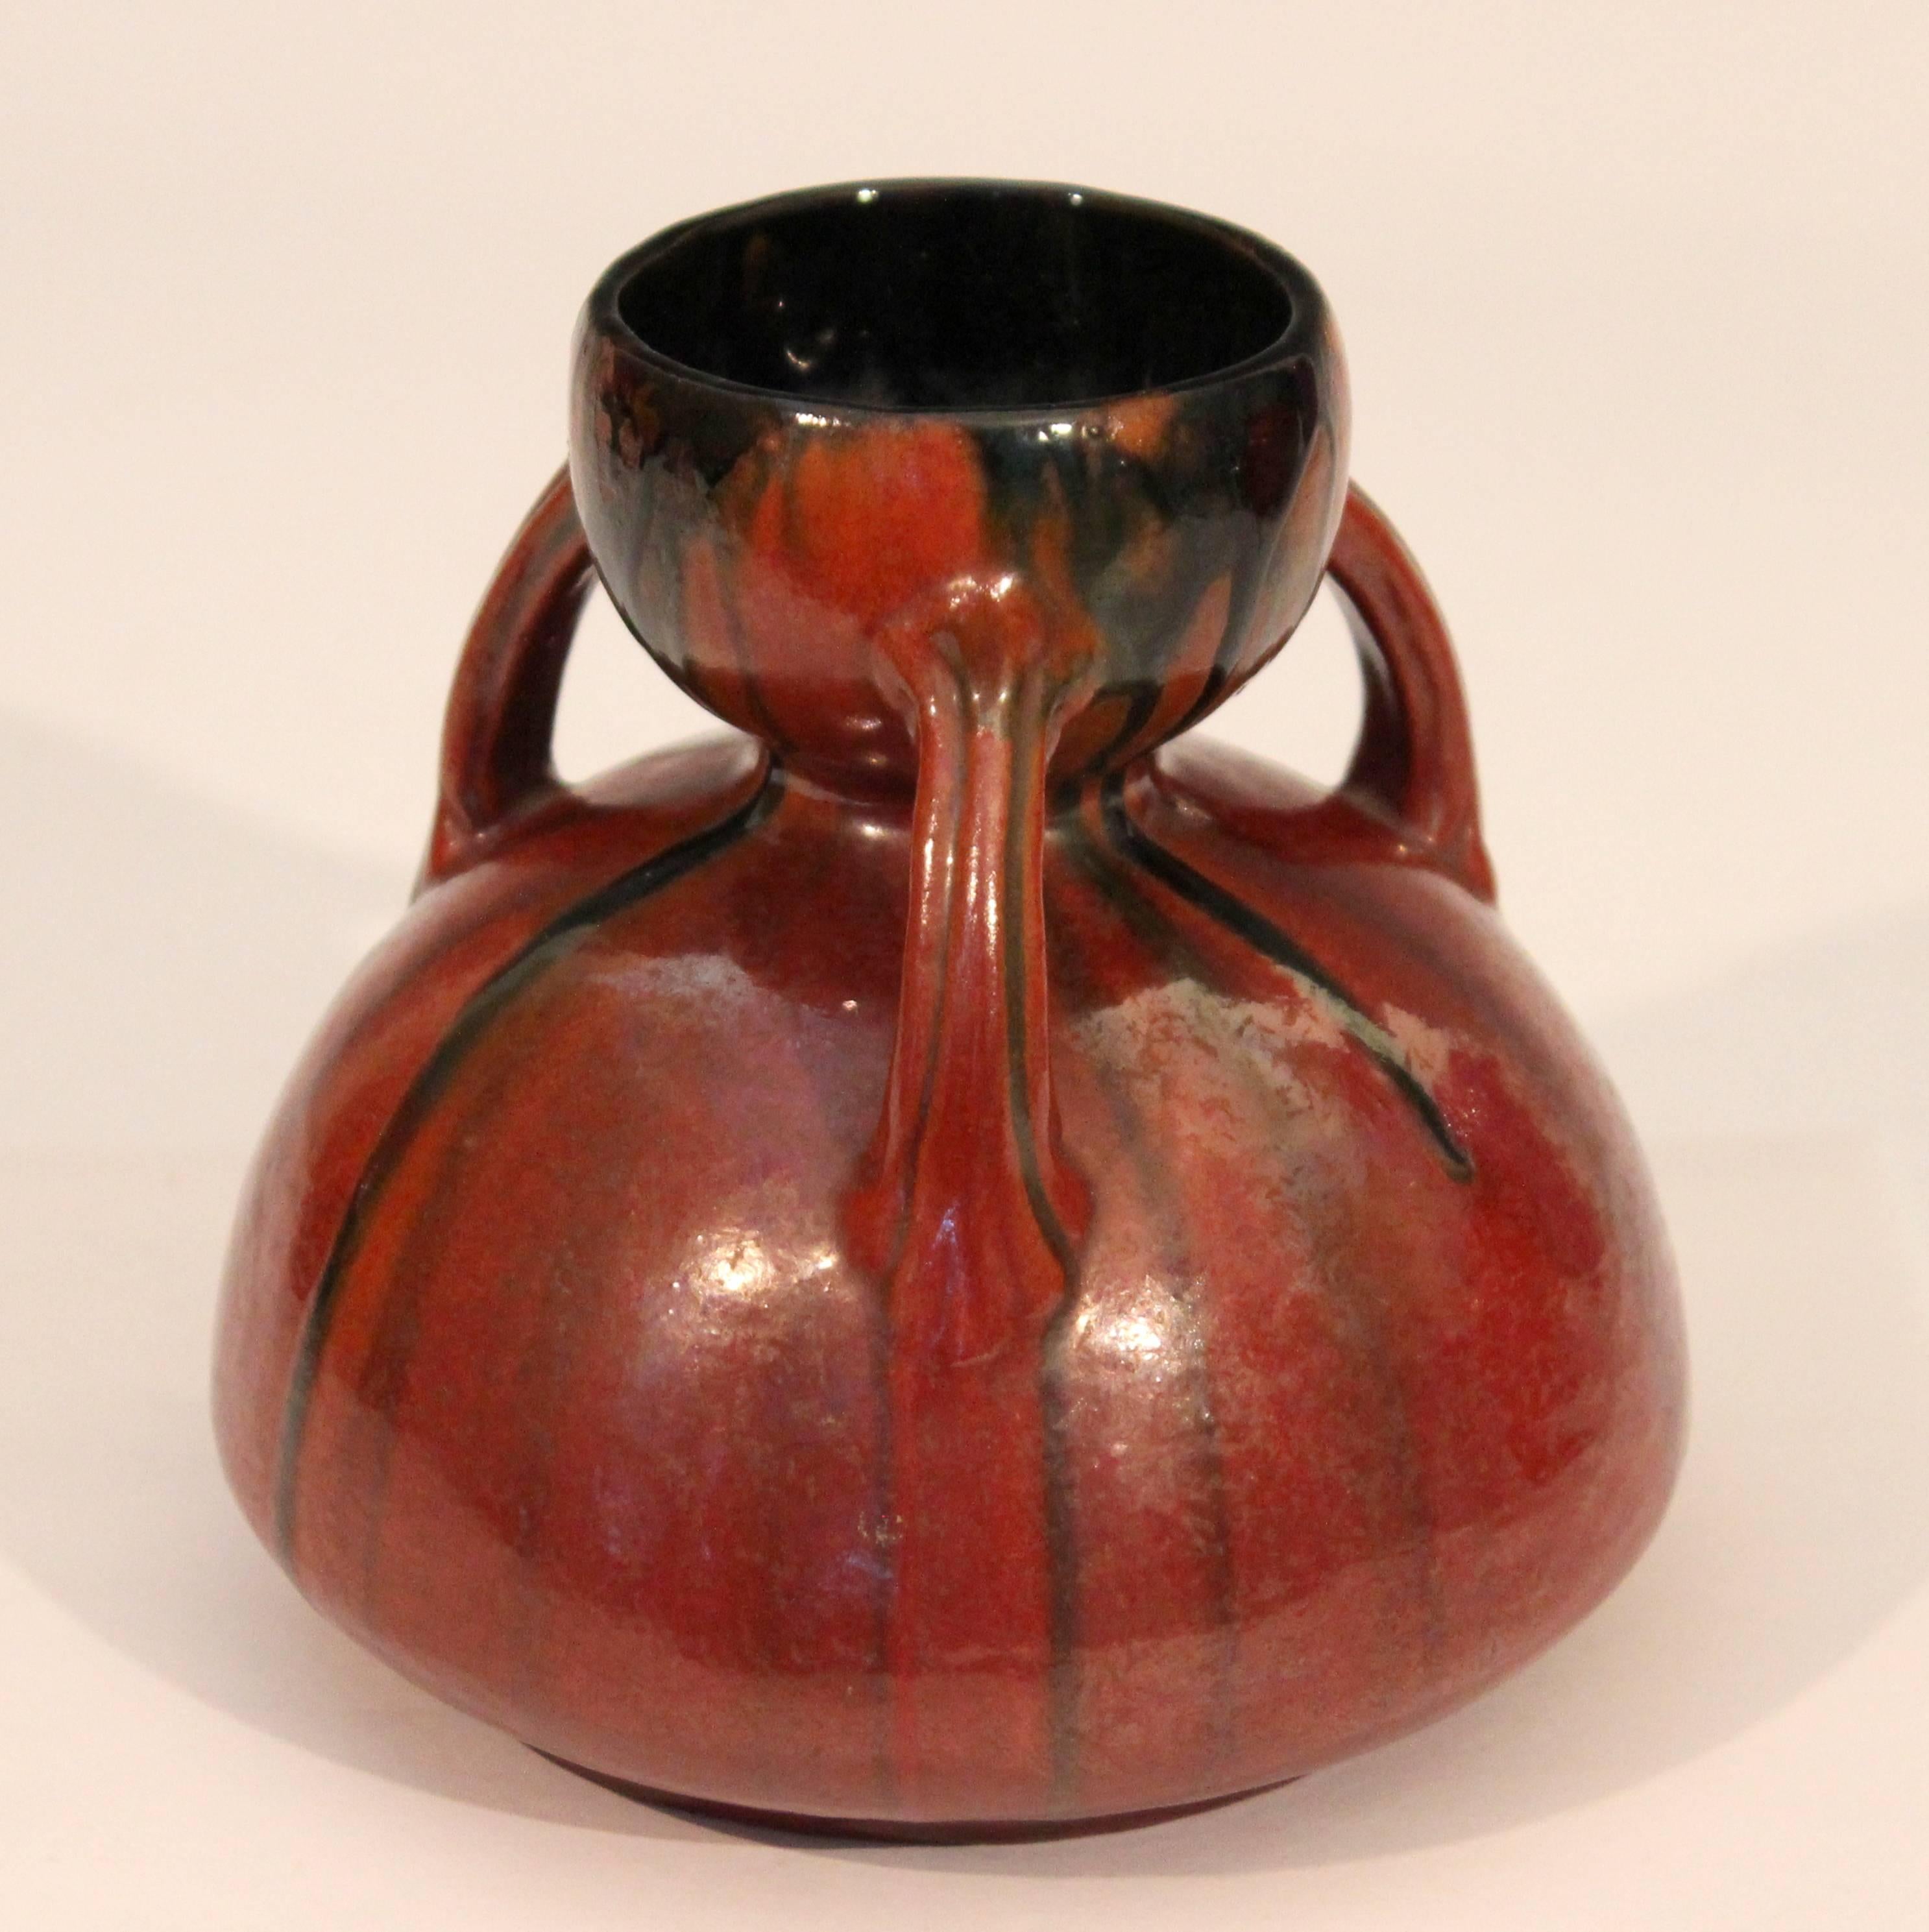 Vintage French Art Deco vase in gourd form with three handles and crystalline chrome orange drip glaze. Hand-turned in red clay with export mark and inventory number on base, circa 1930s. Measures: 5 1/4